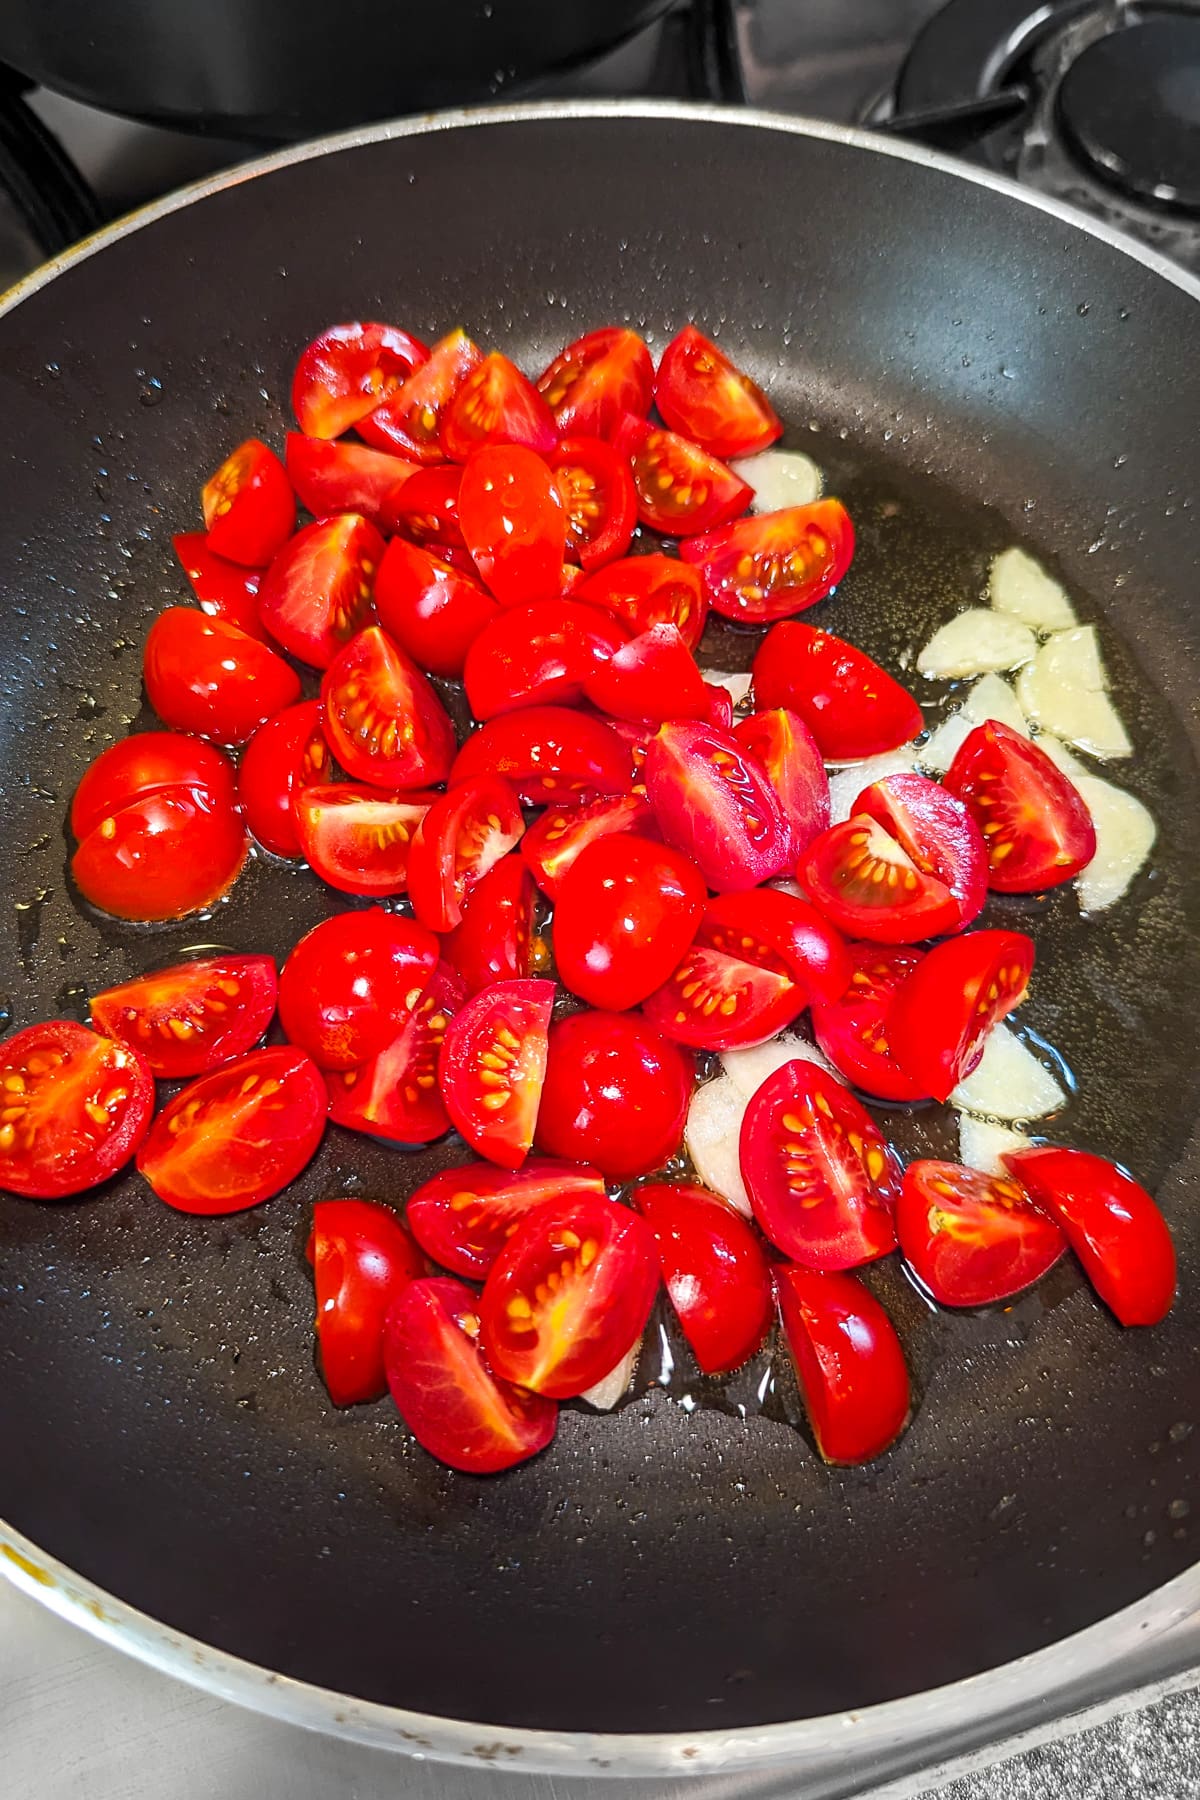 Tomatoes and garlic in a frying pan on the stove.